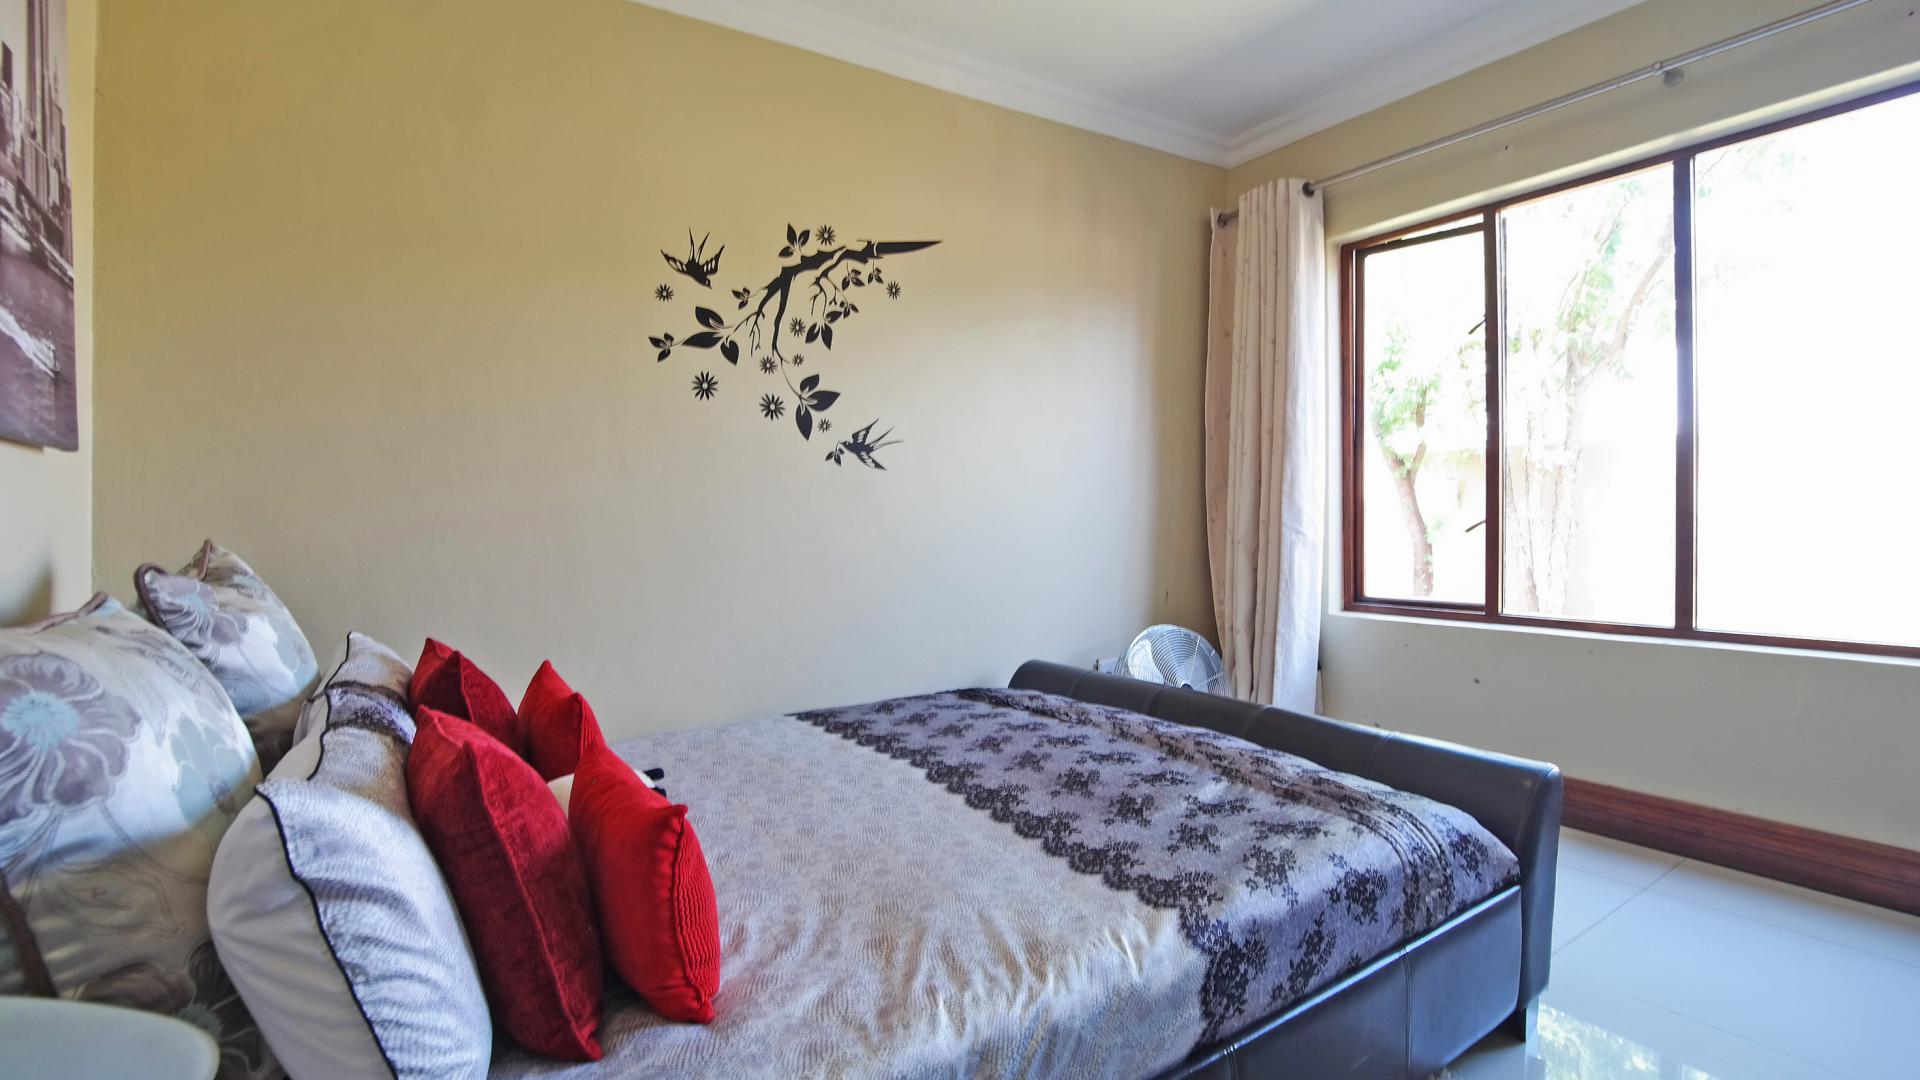 Bed Room 1 - 14 square meters of property in Silverwoods Country Estate